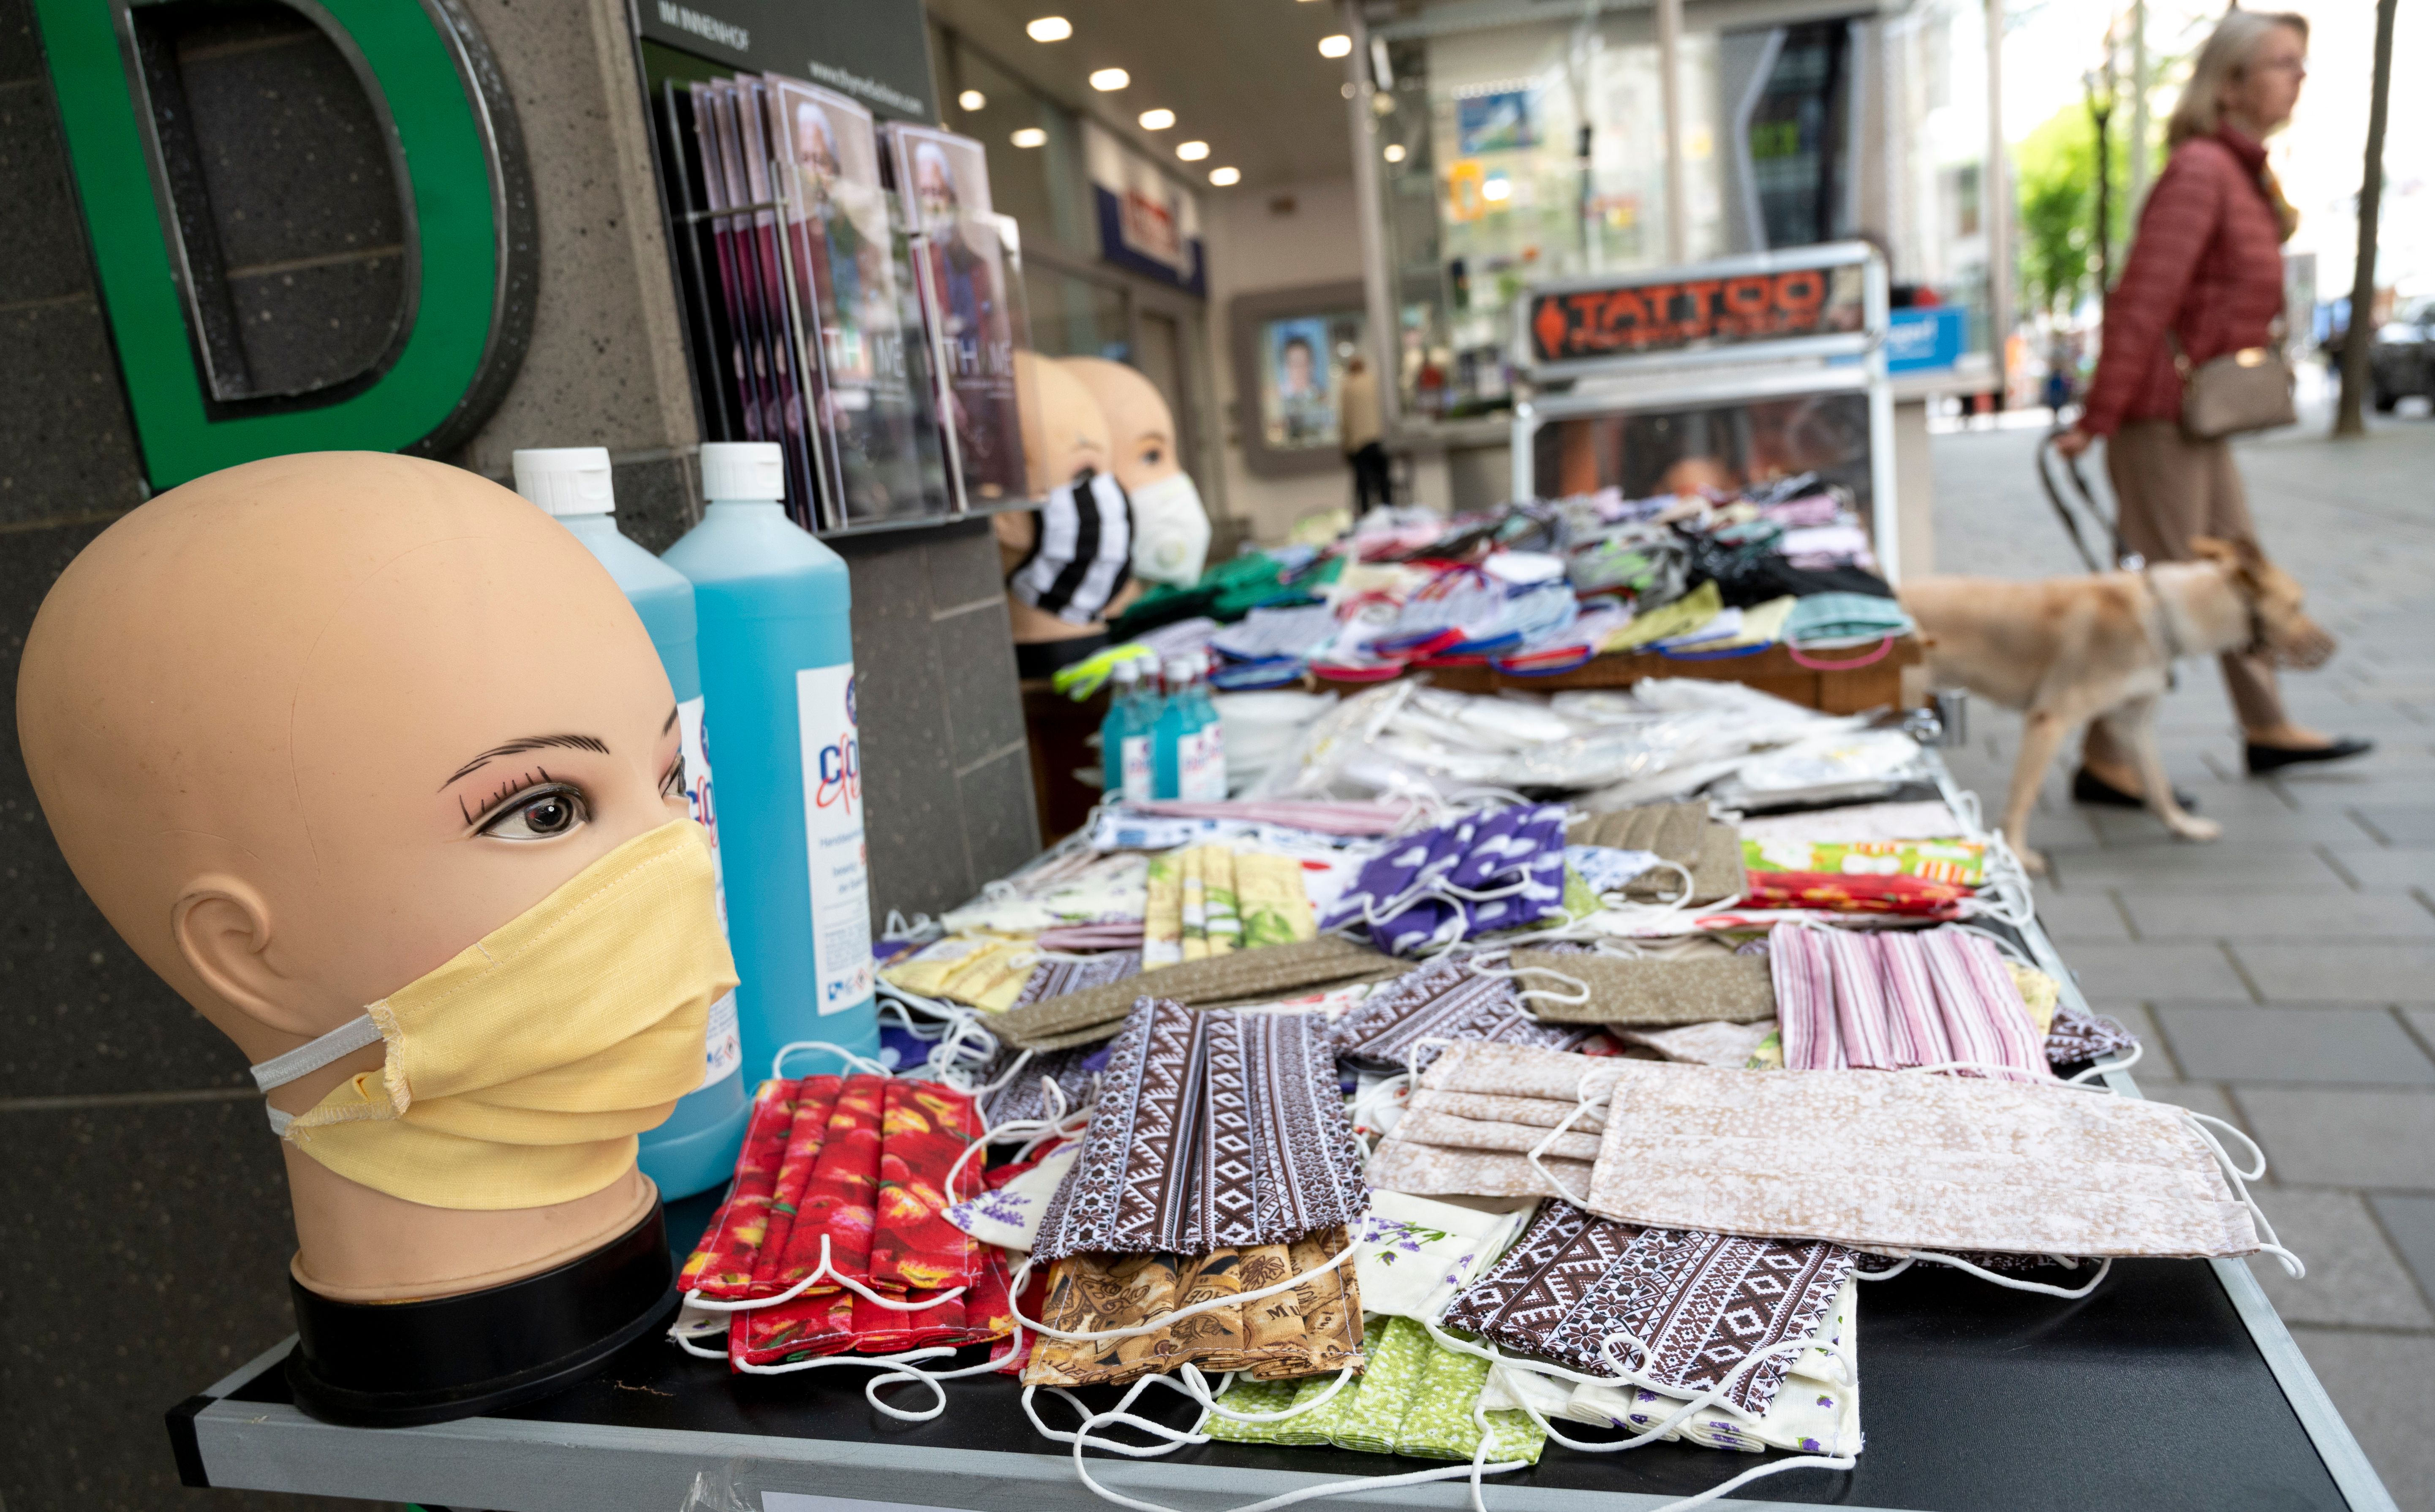 Handmade face masks on display are sold by a street vendor in Vienna, Austria on May 4, 2020. (Photo by JOE KLAMAR/AFP via Getty Images)